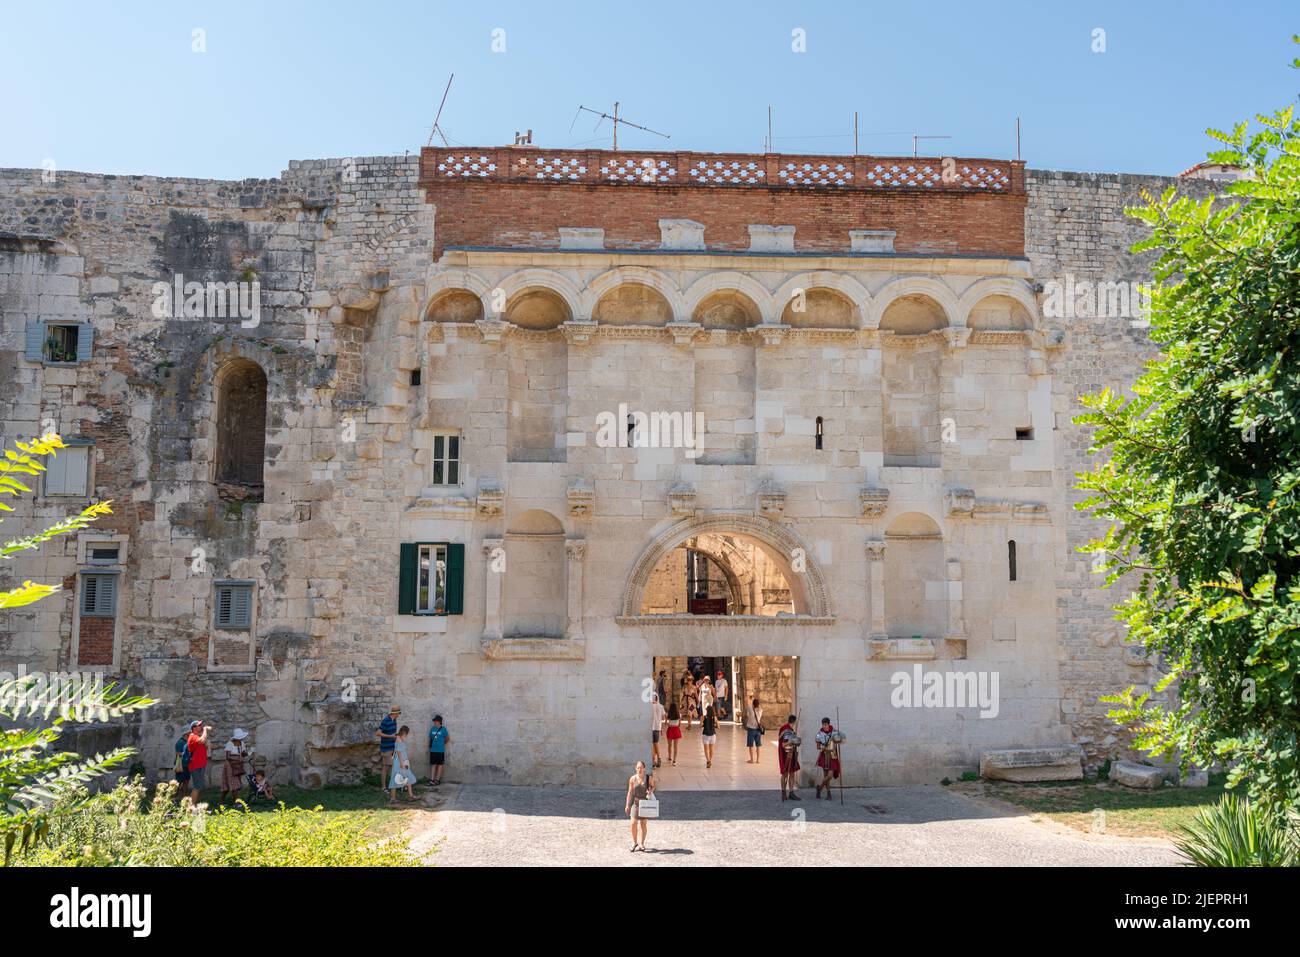 SPLIT, CROATIA - JULY 30, 2021: Golden Gate or the Northern Gate, is one of the four main Roman gates into the old town of Split and was built as part Stock Photo